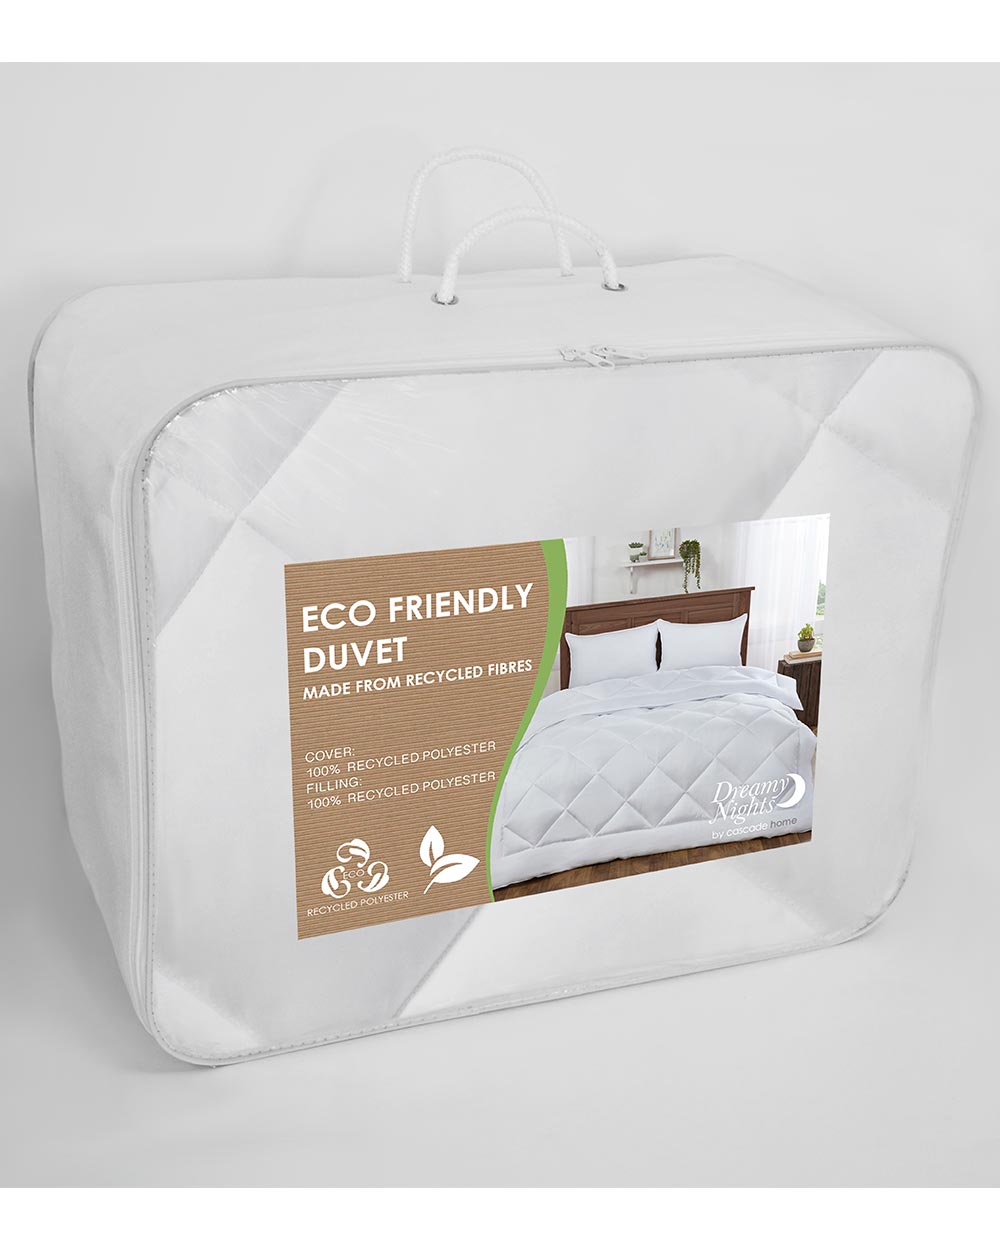 Everybody deserves a great night's sleep, this Eco Friendly Double Duvet 10.5 Tog provides that cosy feeling helping you sleep soundly.   This double duvet fits any standard size double bed comfortably. Measuring 200 cm x 200 cm this duvet gives just the right amount of drape for maximum comfort.